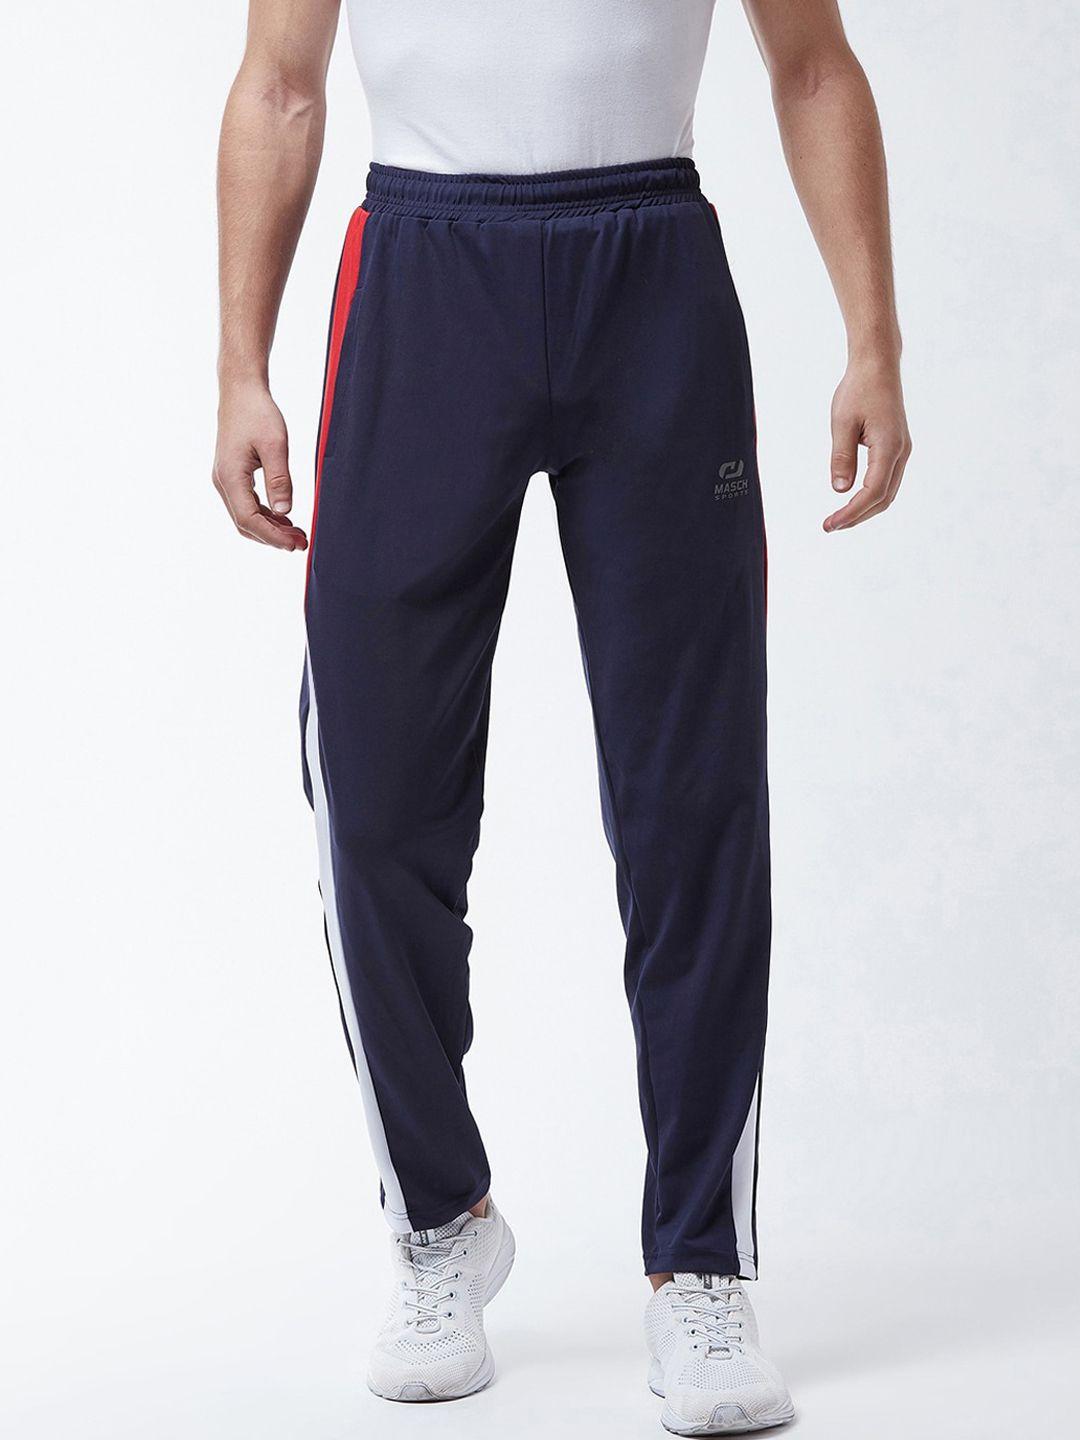 masch sports men navy blue solid training or gym track pants